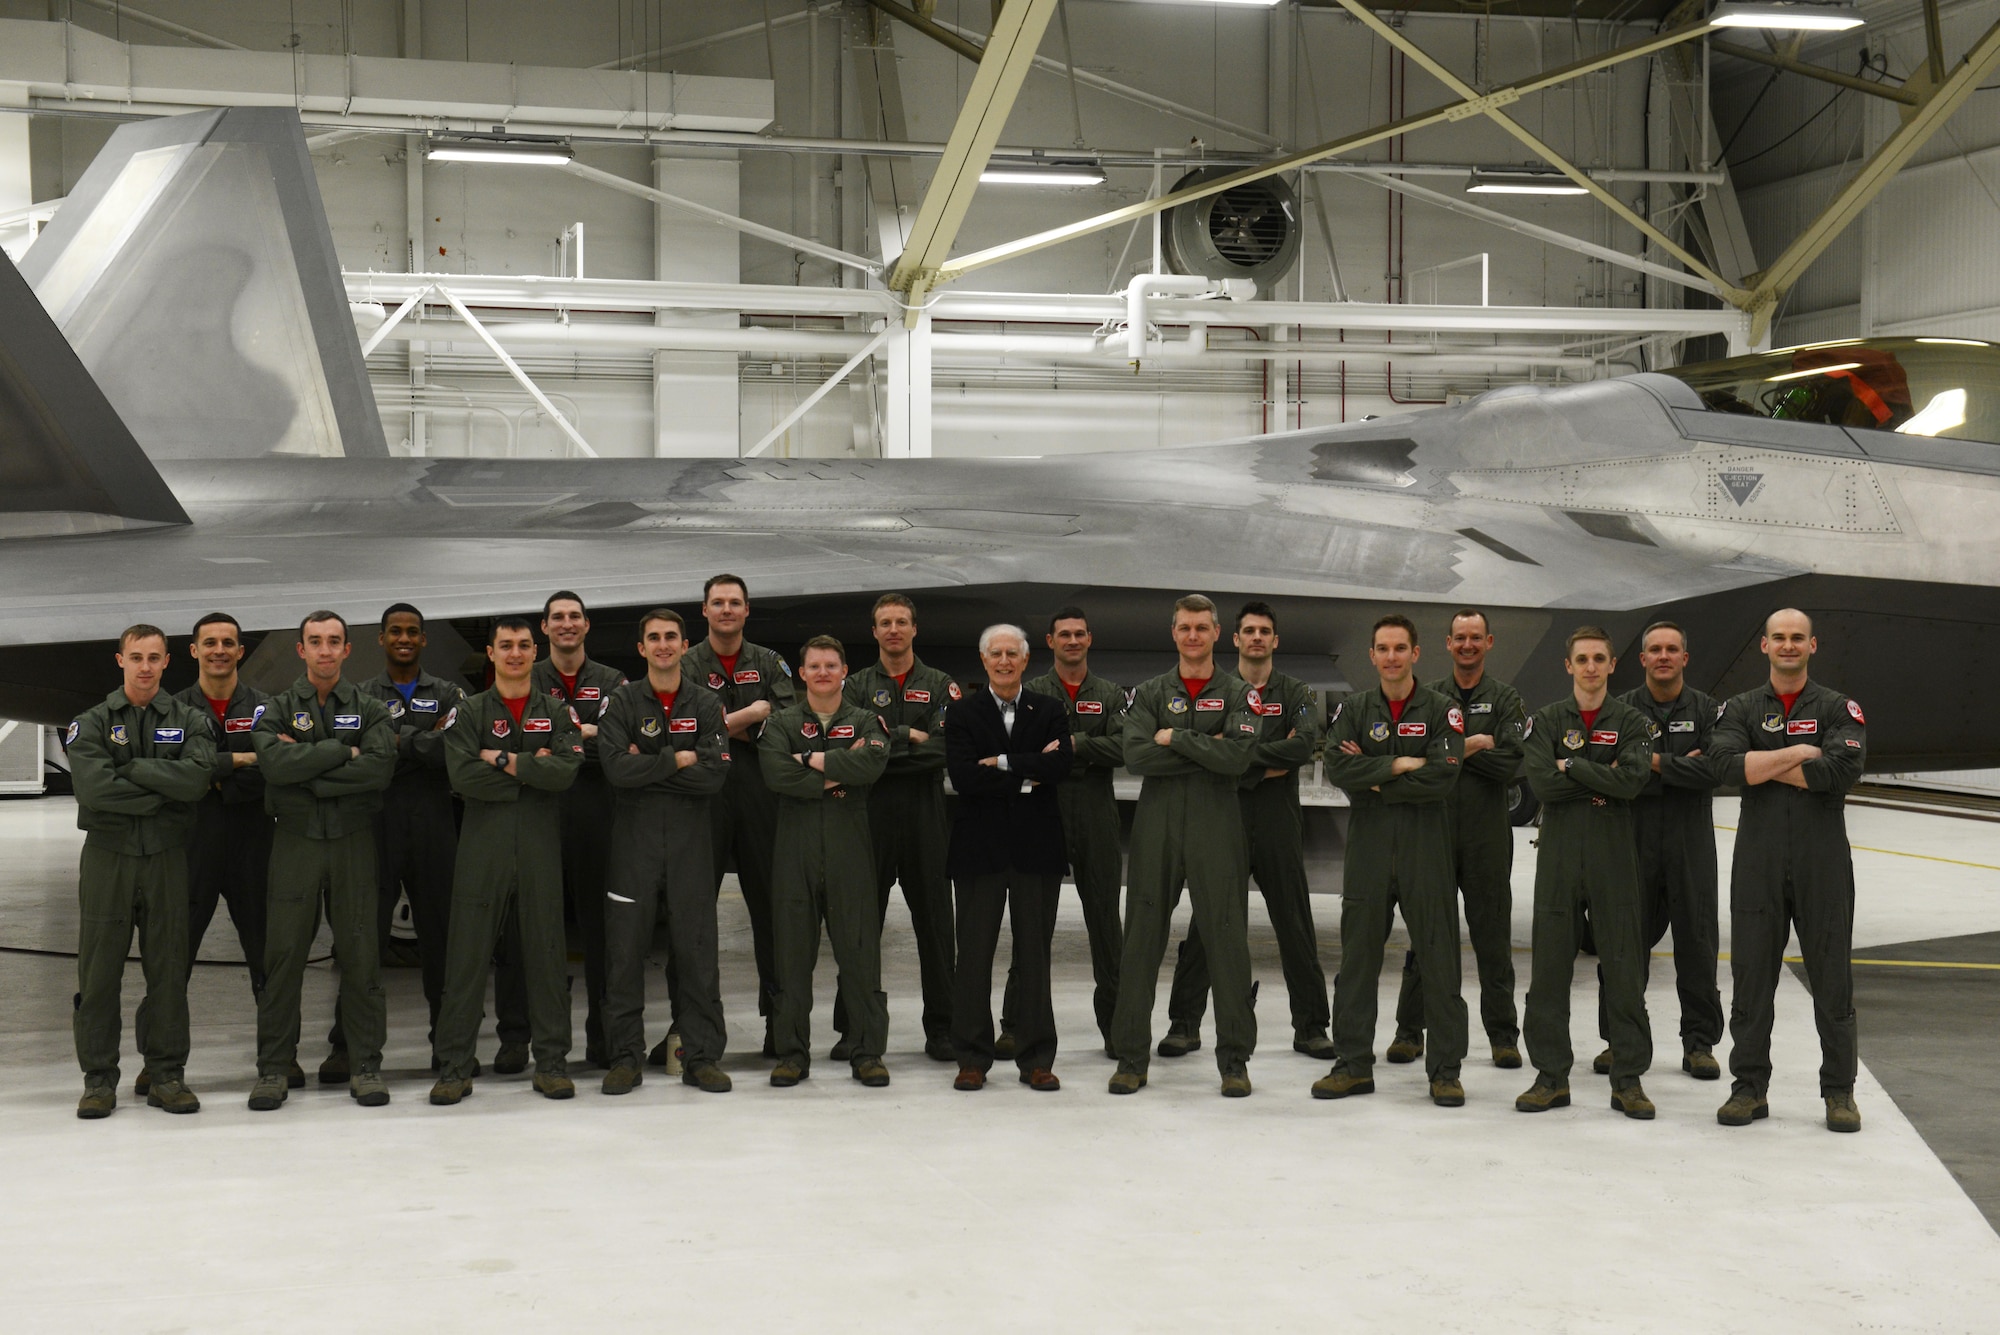 Donald W. Sheppard, a retired Air Force Major General (middle), visits the 90th Fighter Squadron at Joint Base Elmendorf-Richardson, Alaska, Jan. 20, 2017. Sheppard, a pilot with more than 5,000 flying hours, and 247 combat missions during the Vietnam War, spoke about his experiences in the Air Force and provided insight into how the military can keep improving.